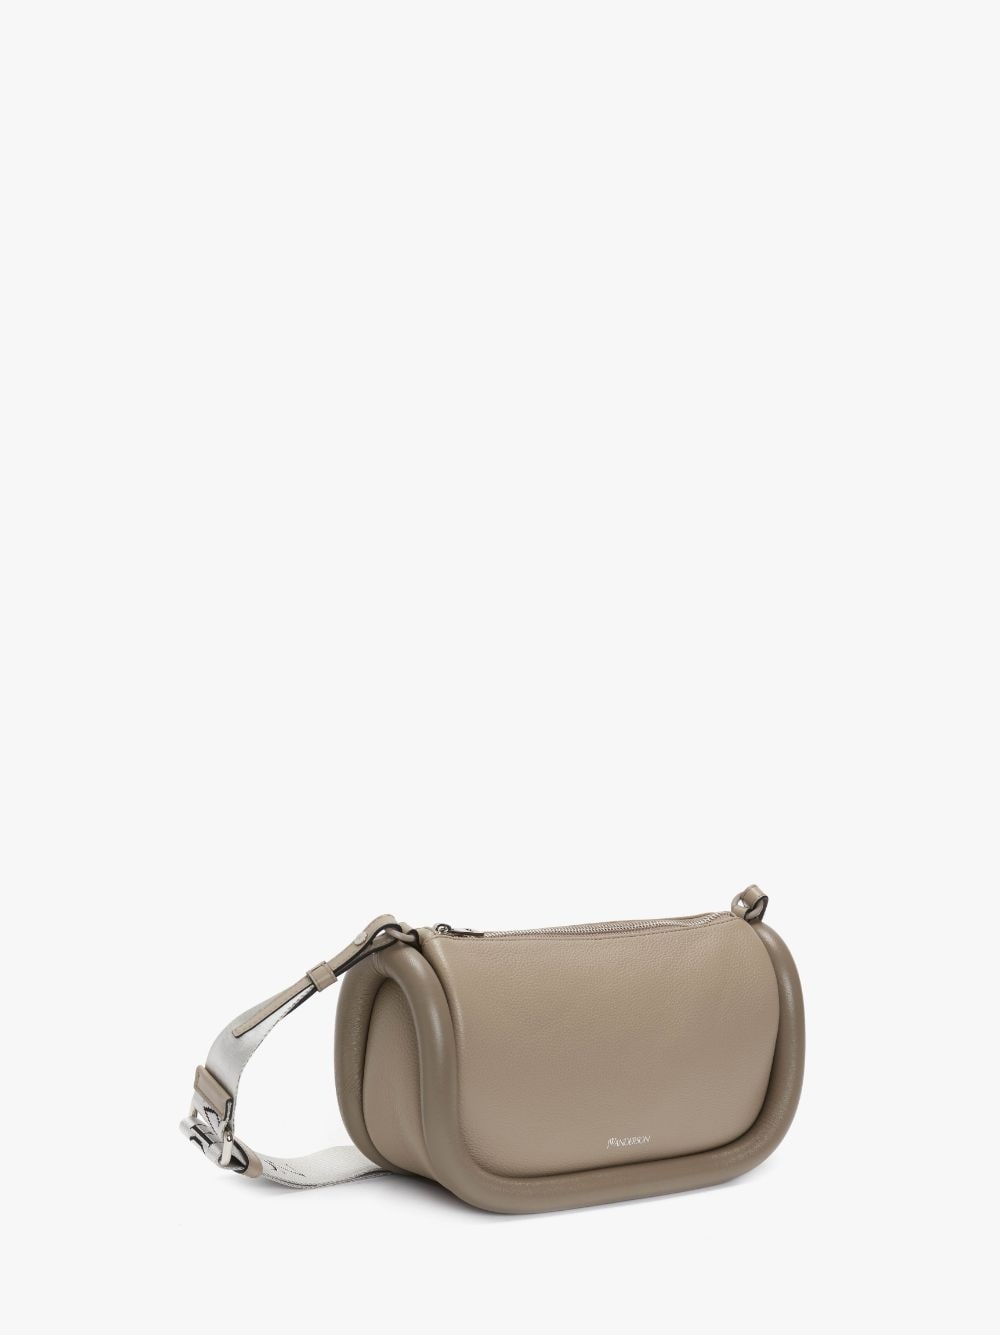 BUMPER-15 - LEATHER CROSSBODY BAG WITH ADDITIONAL WEBBING STRAP - 2